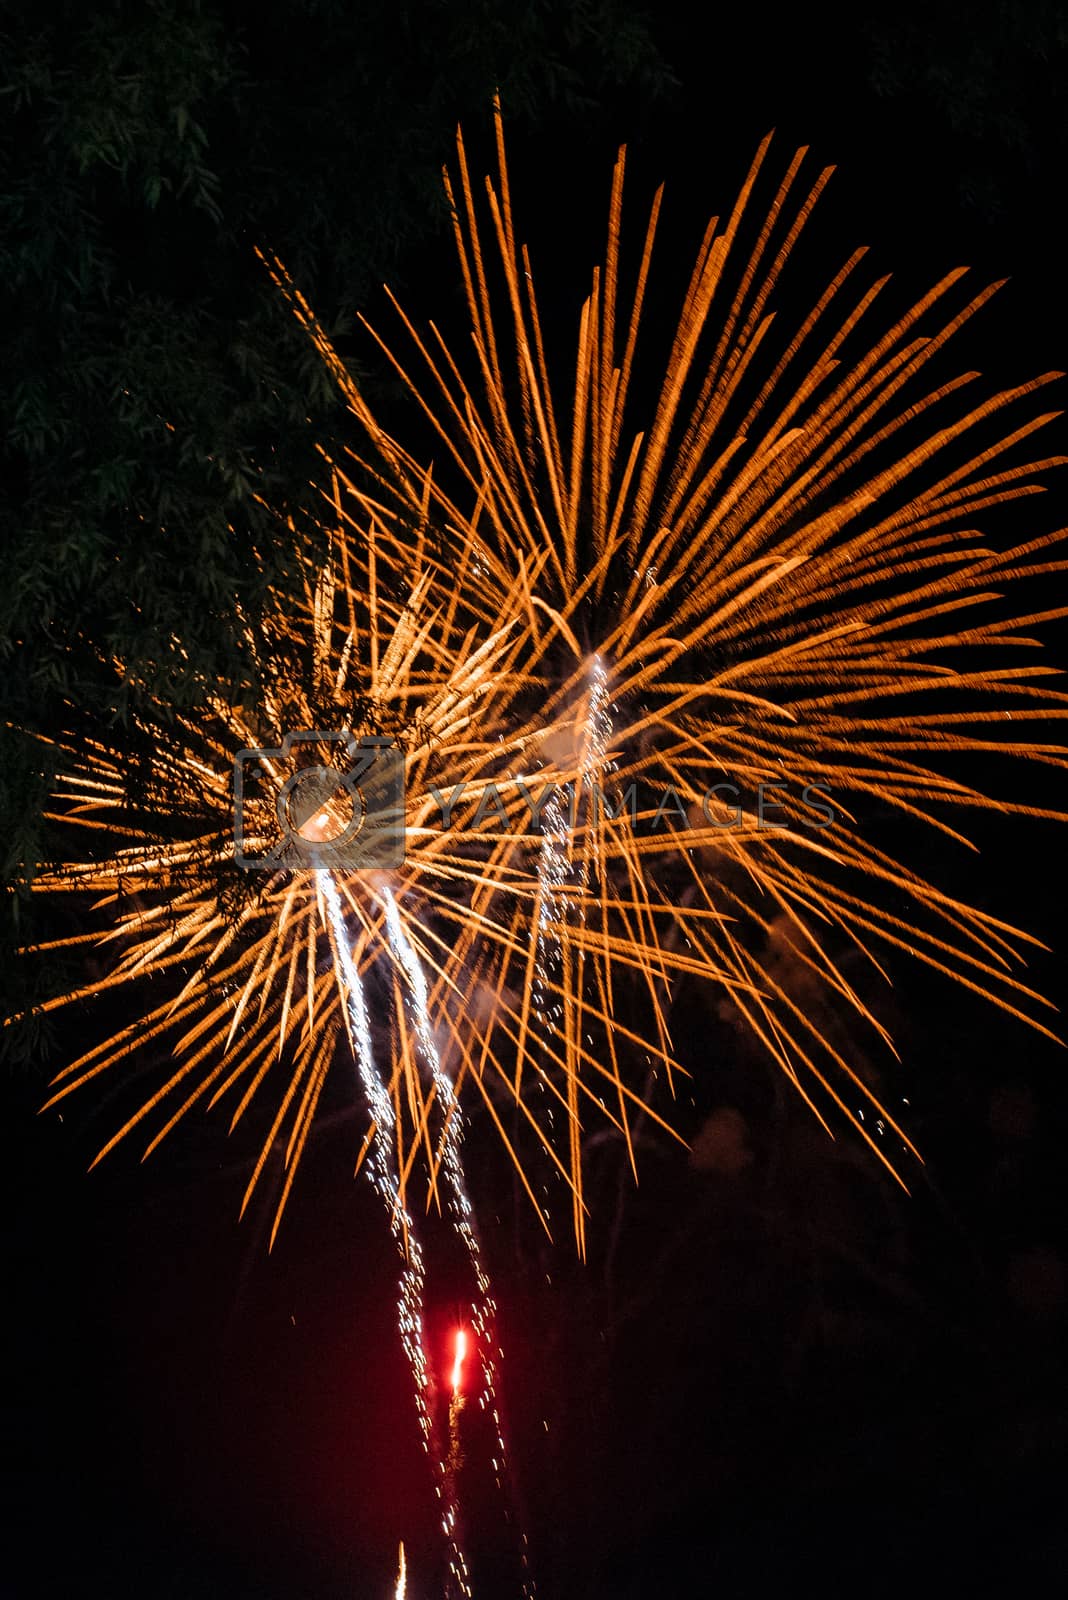 Royalty free image of fiery pieces of a fire show by Andreua